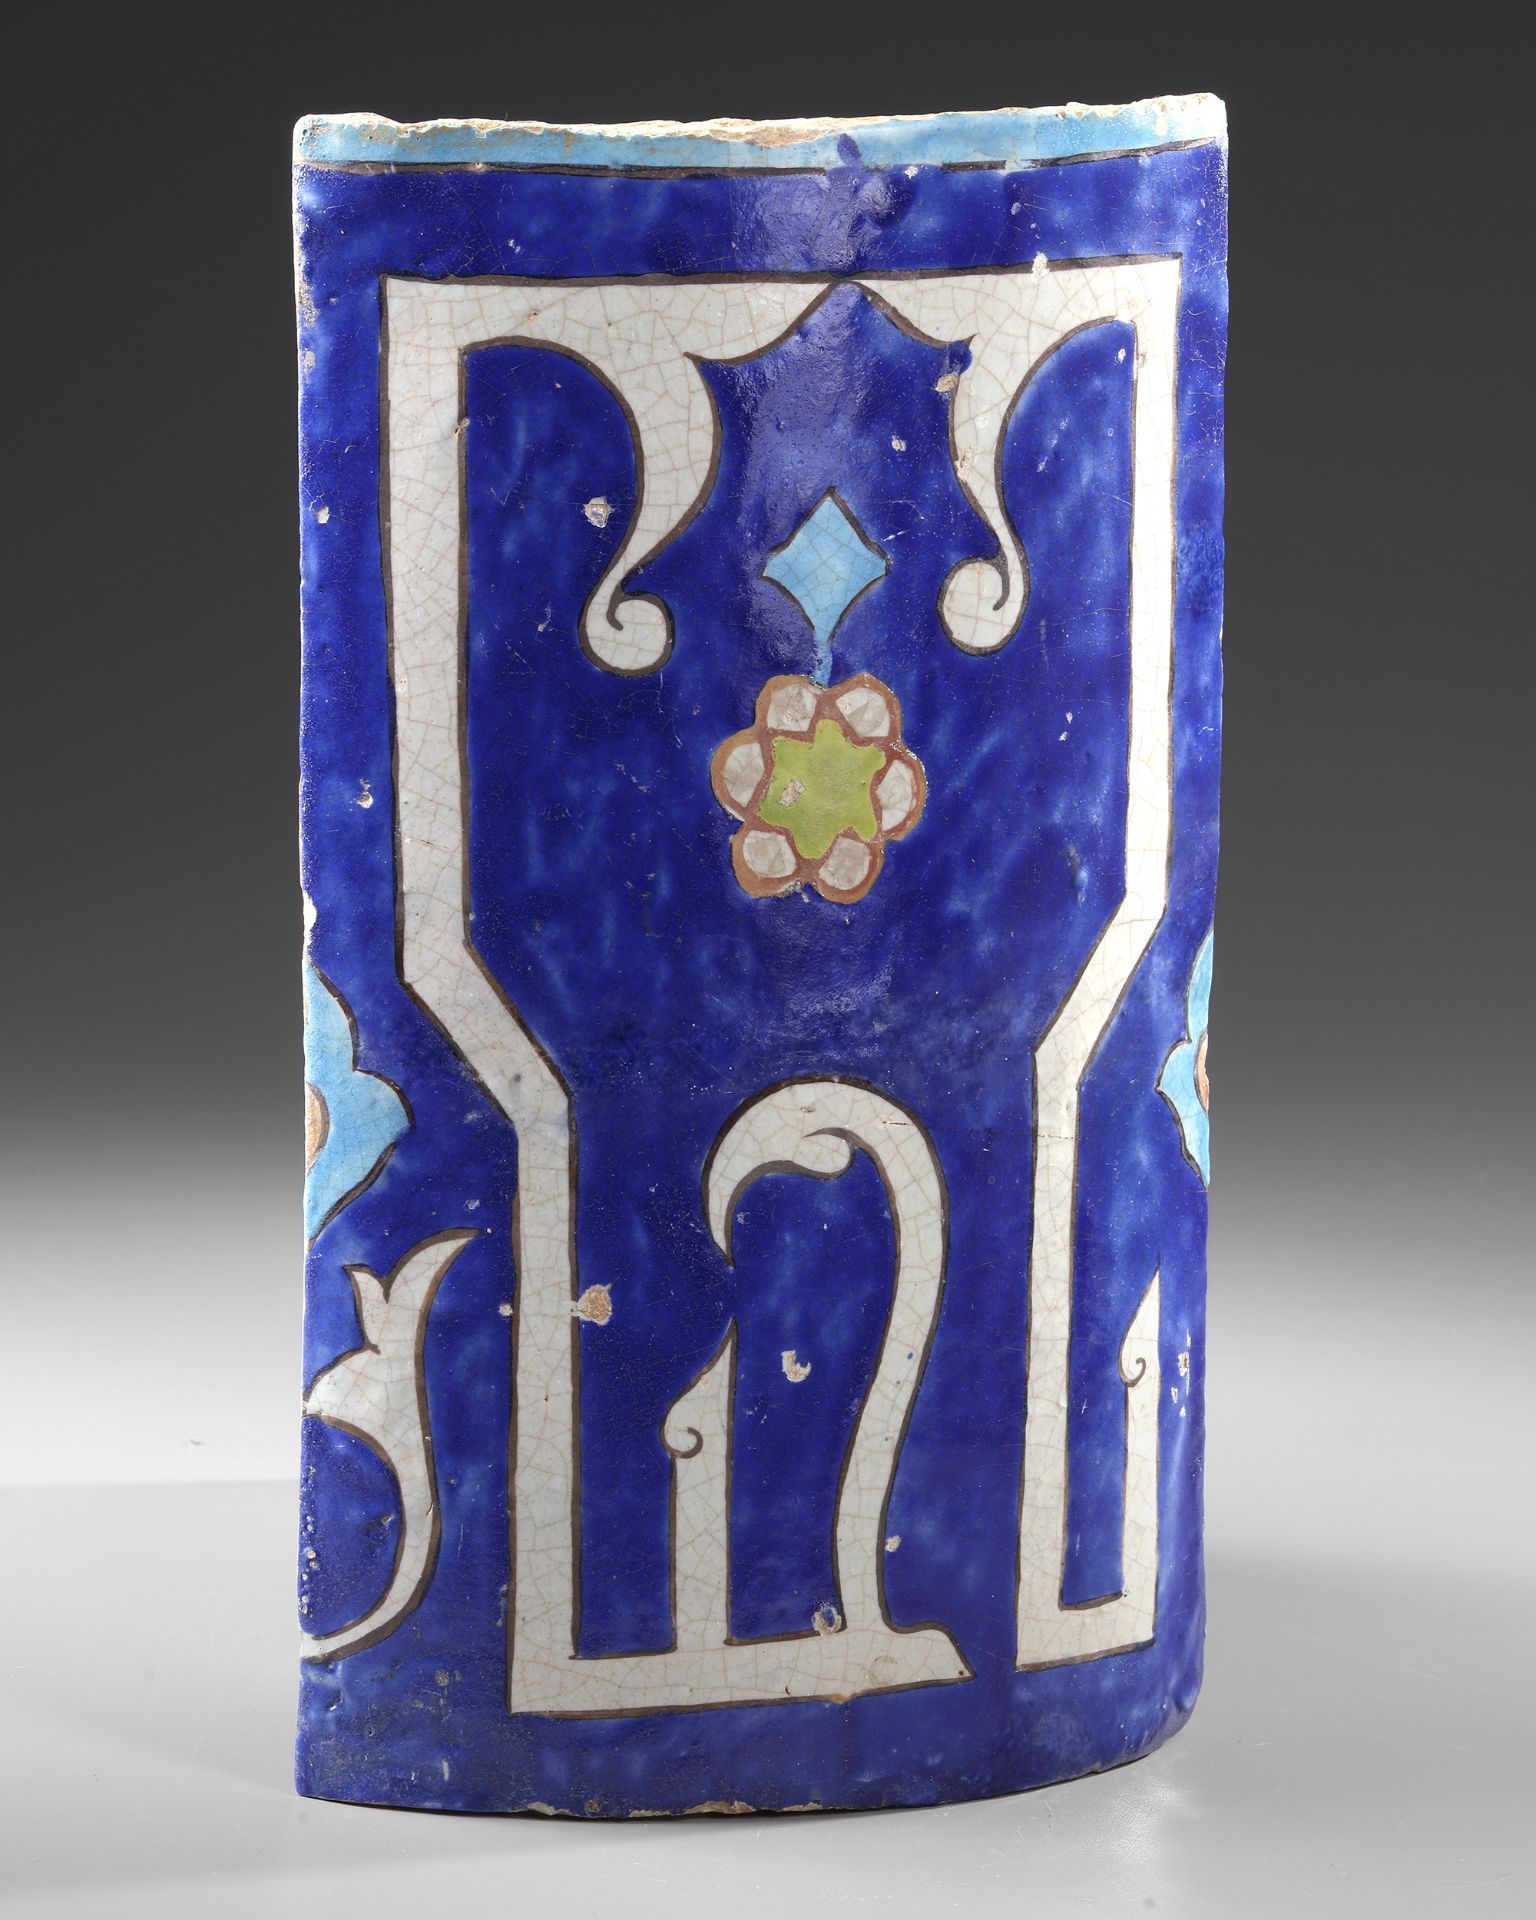 A TIMURID CALLIGRAPHIC POTTERY TILE, CENTRAL ASIA OR EASTERN PERSIA, 14TH-15TH CENTURY - Bild 5 aus 10